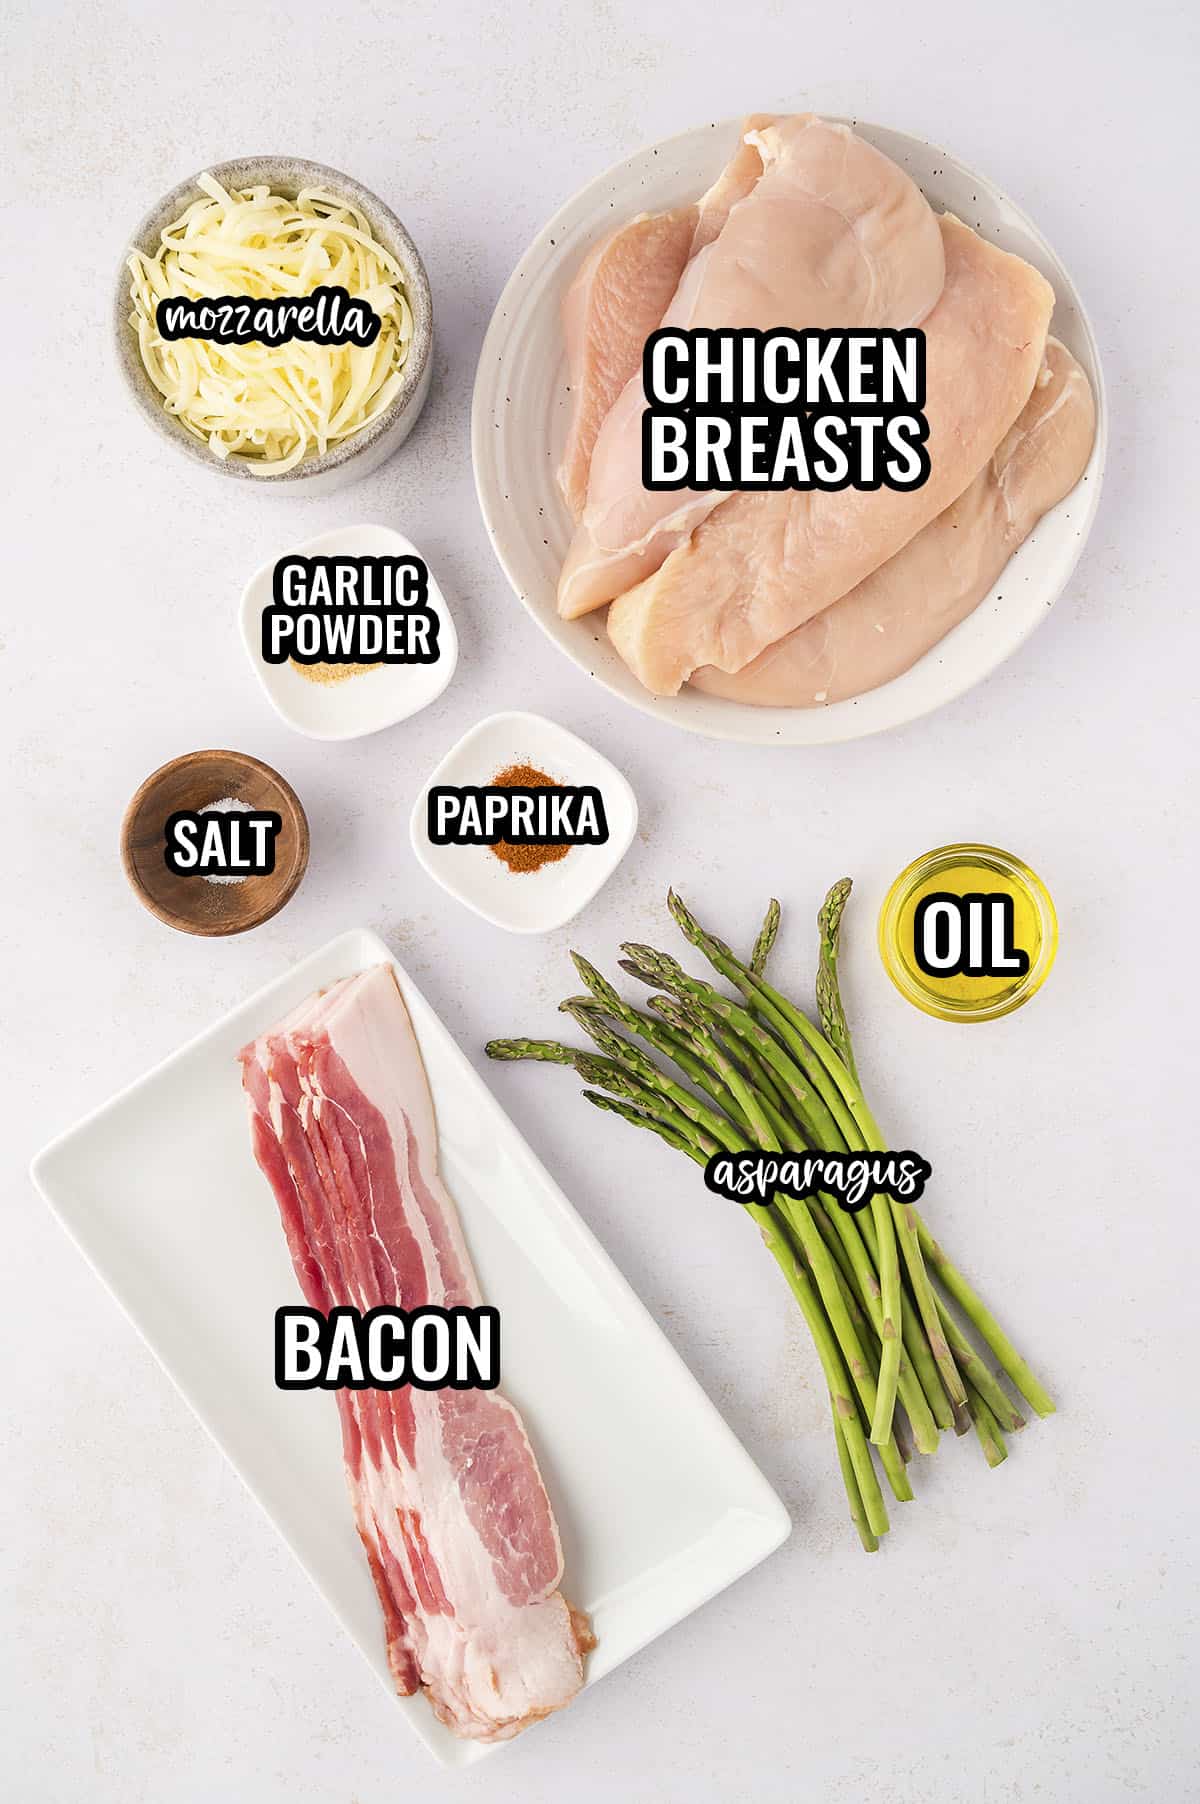 Ingredients for asparagus stuffed chicken breast recipe.